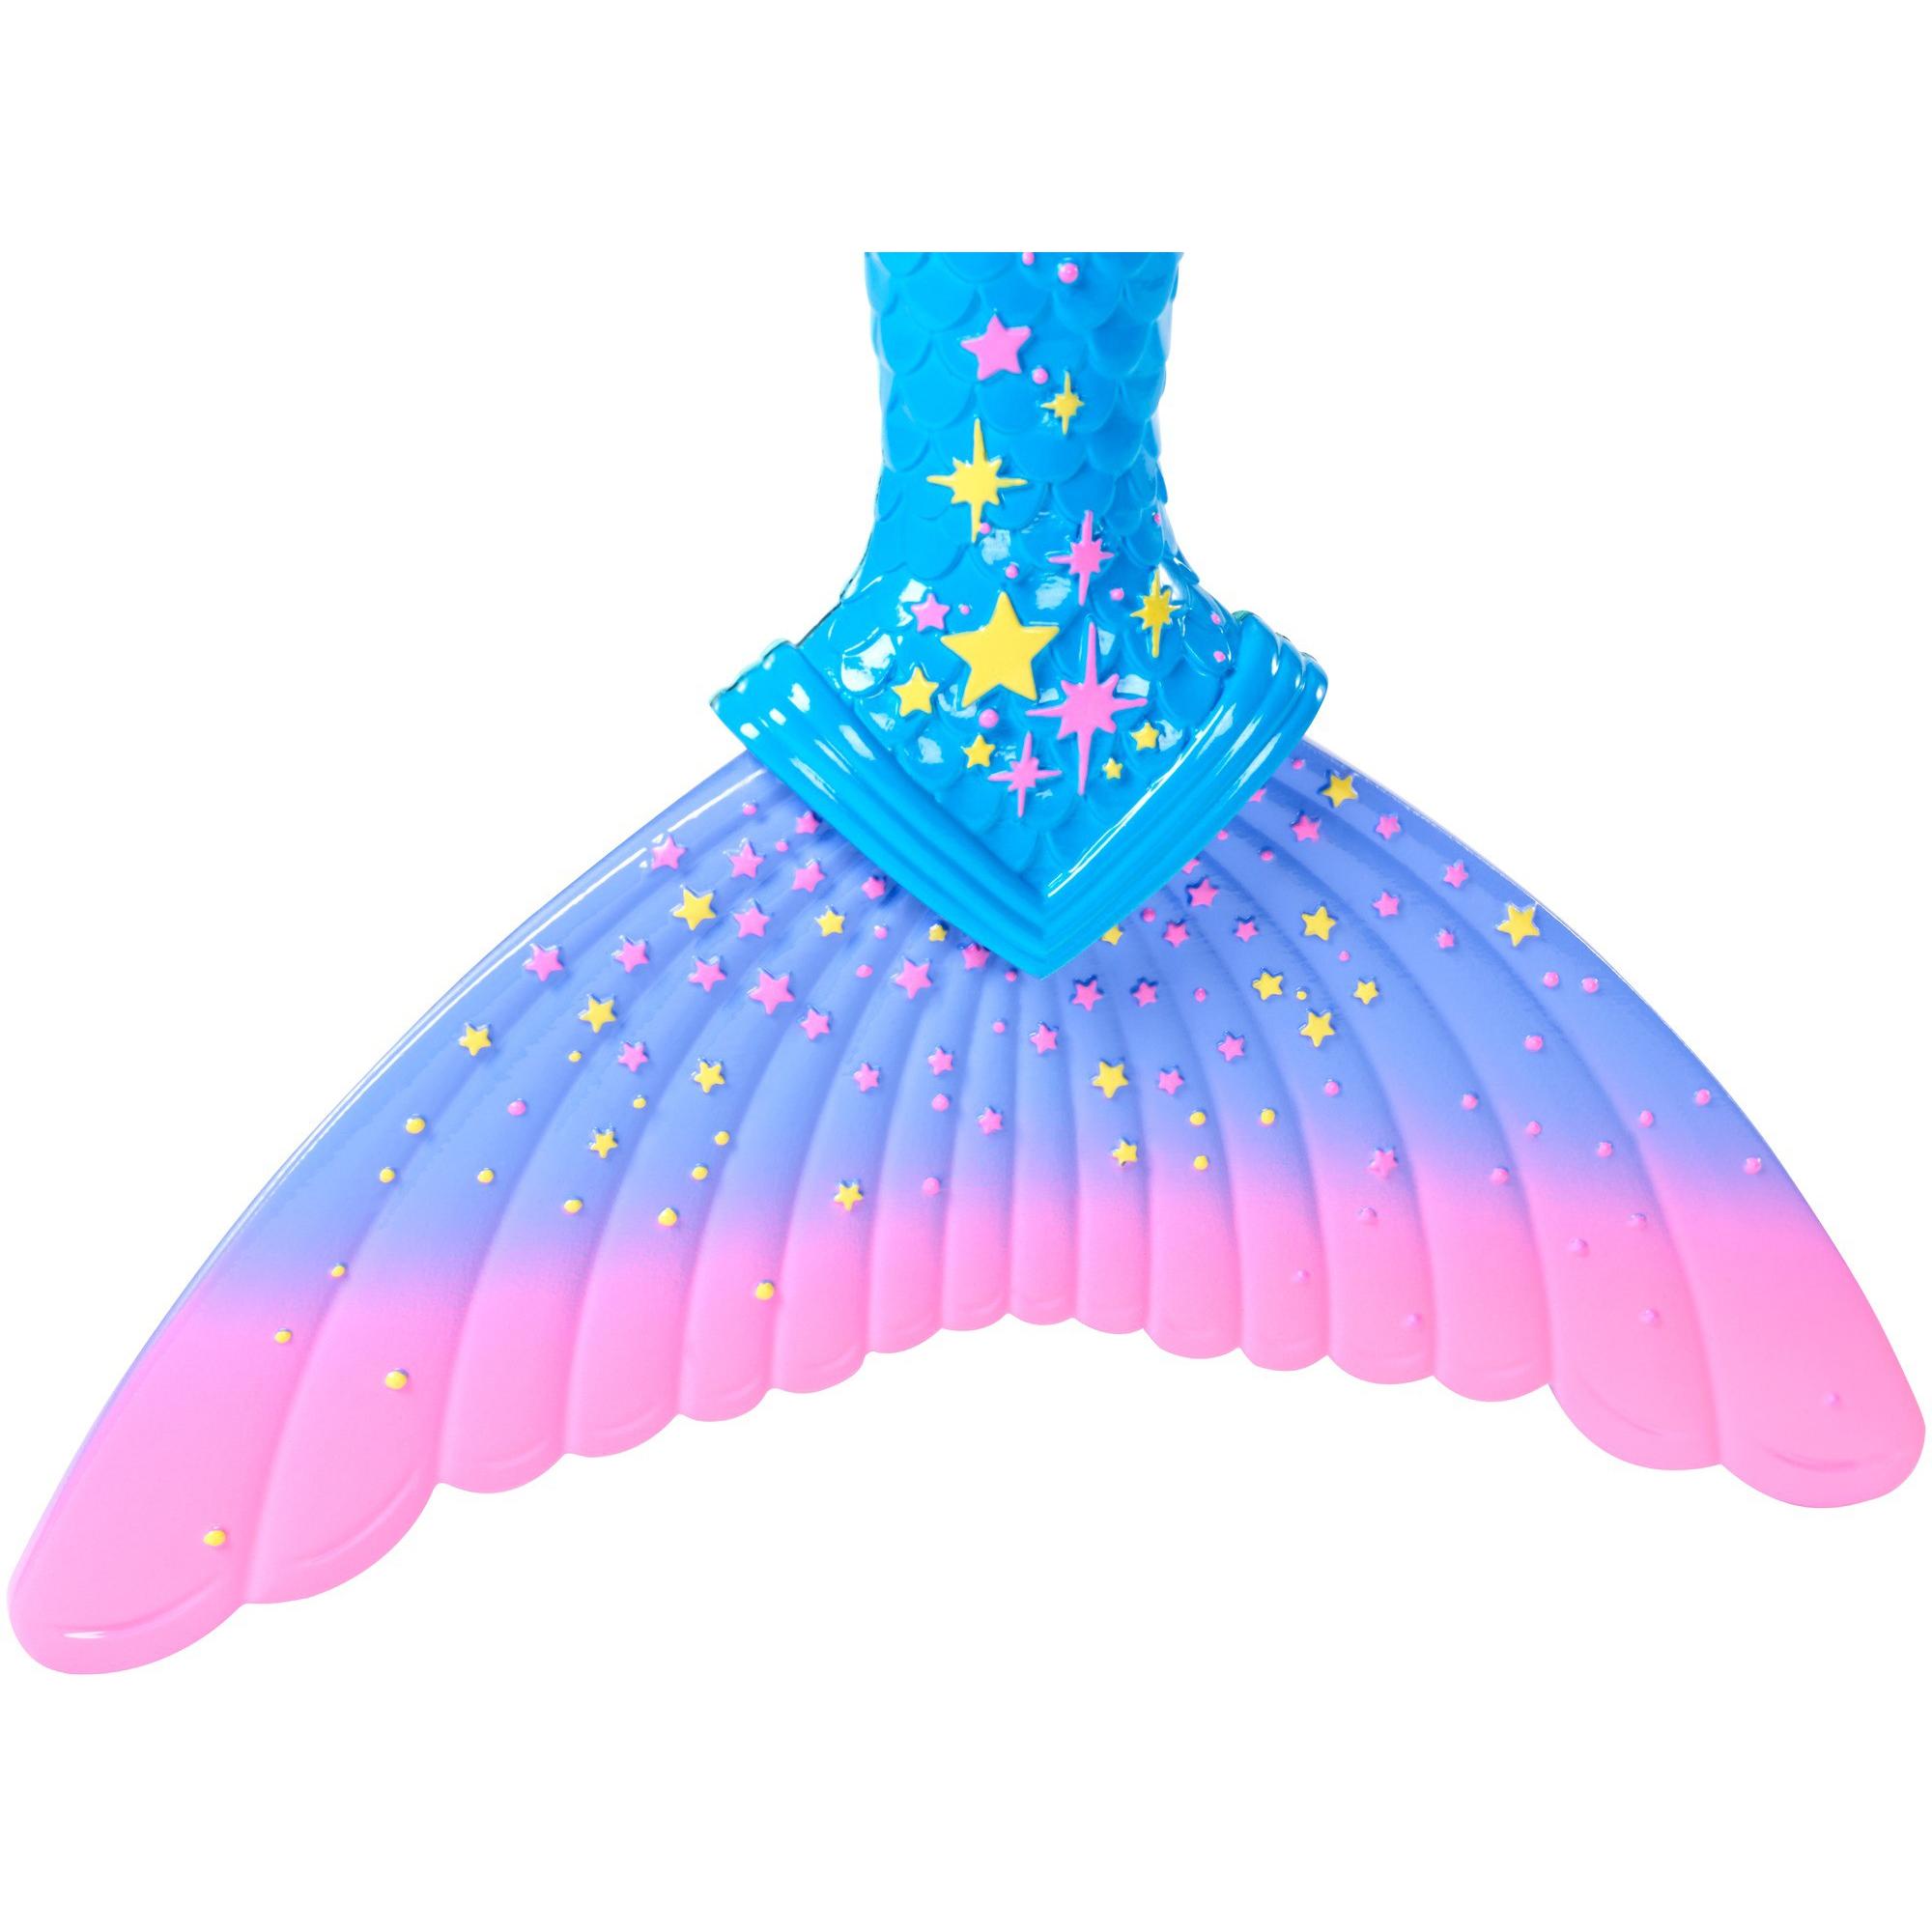 Barbie Dreamtopia Merman Doll, Blonde with Pink Seashell Necklace - image 5 of 6